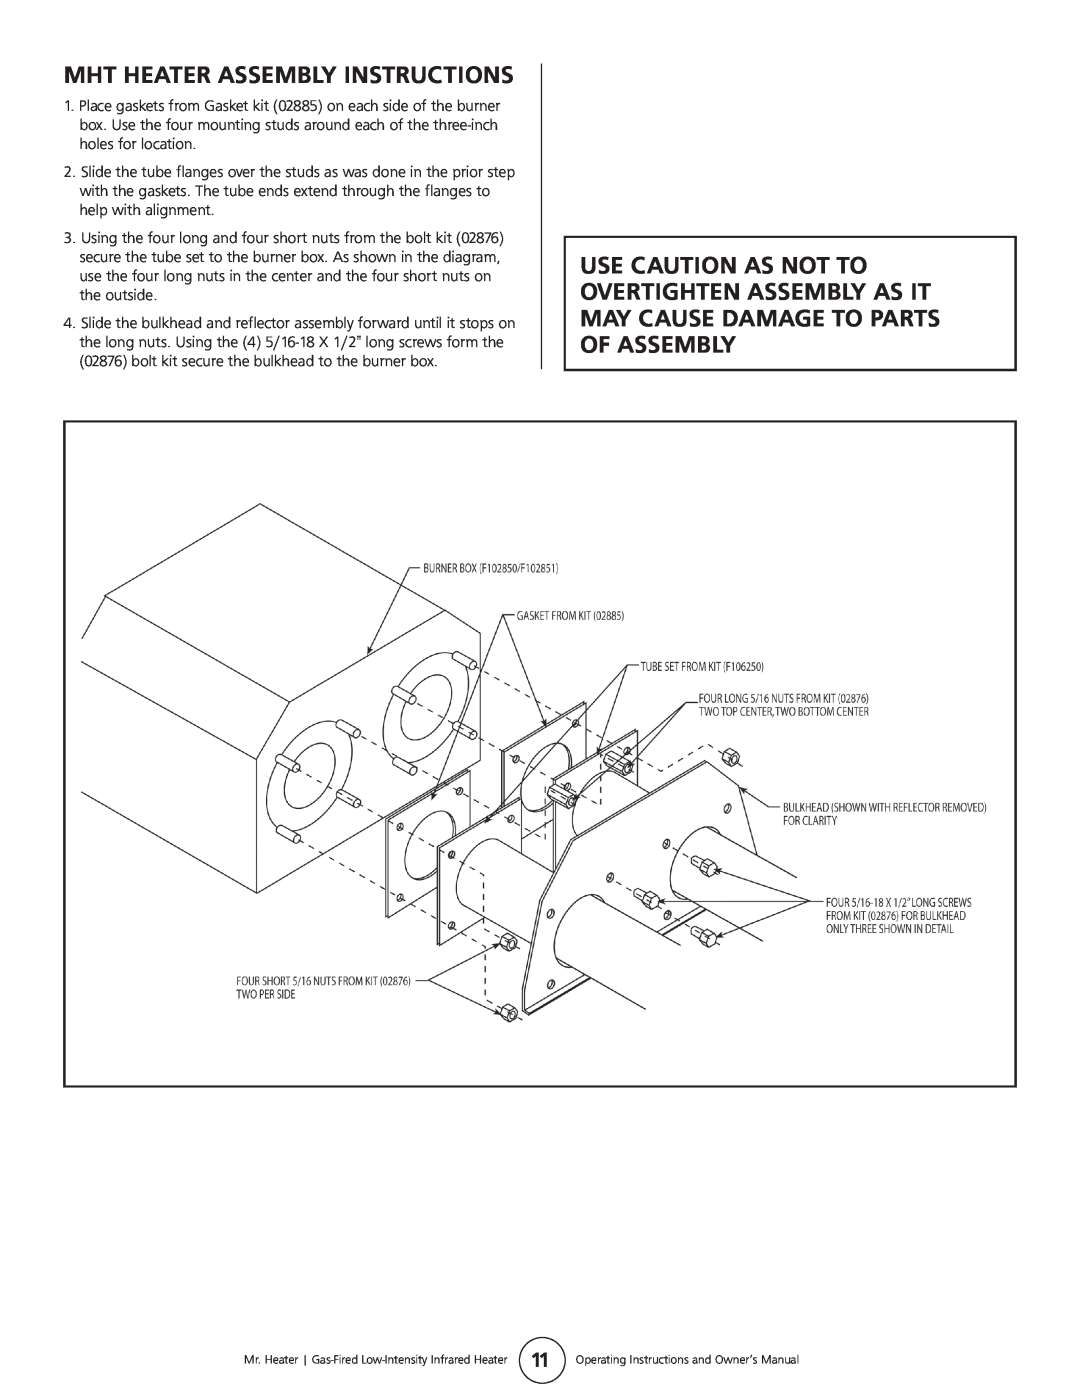 Mr. Heater MHT 45 owner manual Mht Heater Assembly Instructions 